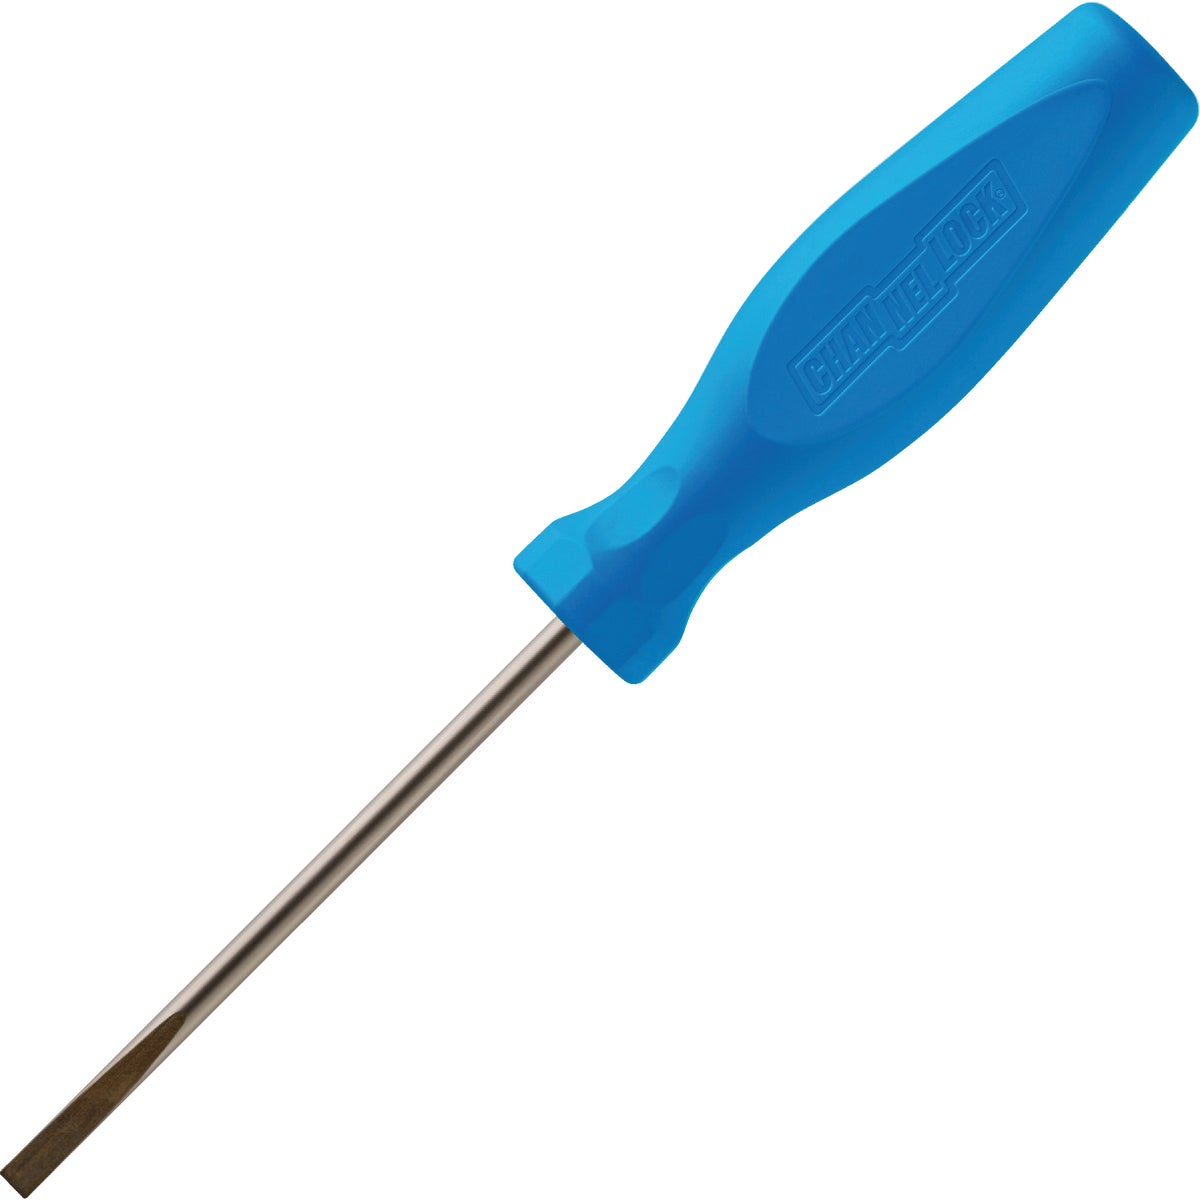 Channellock 3/16 In. x 4 In. Professional Slotted Screwdriver